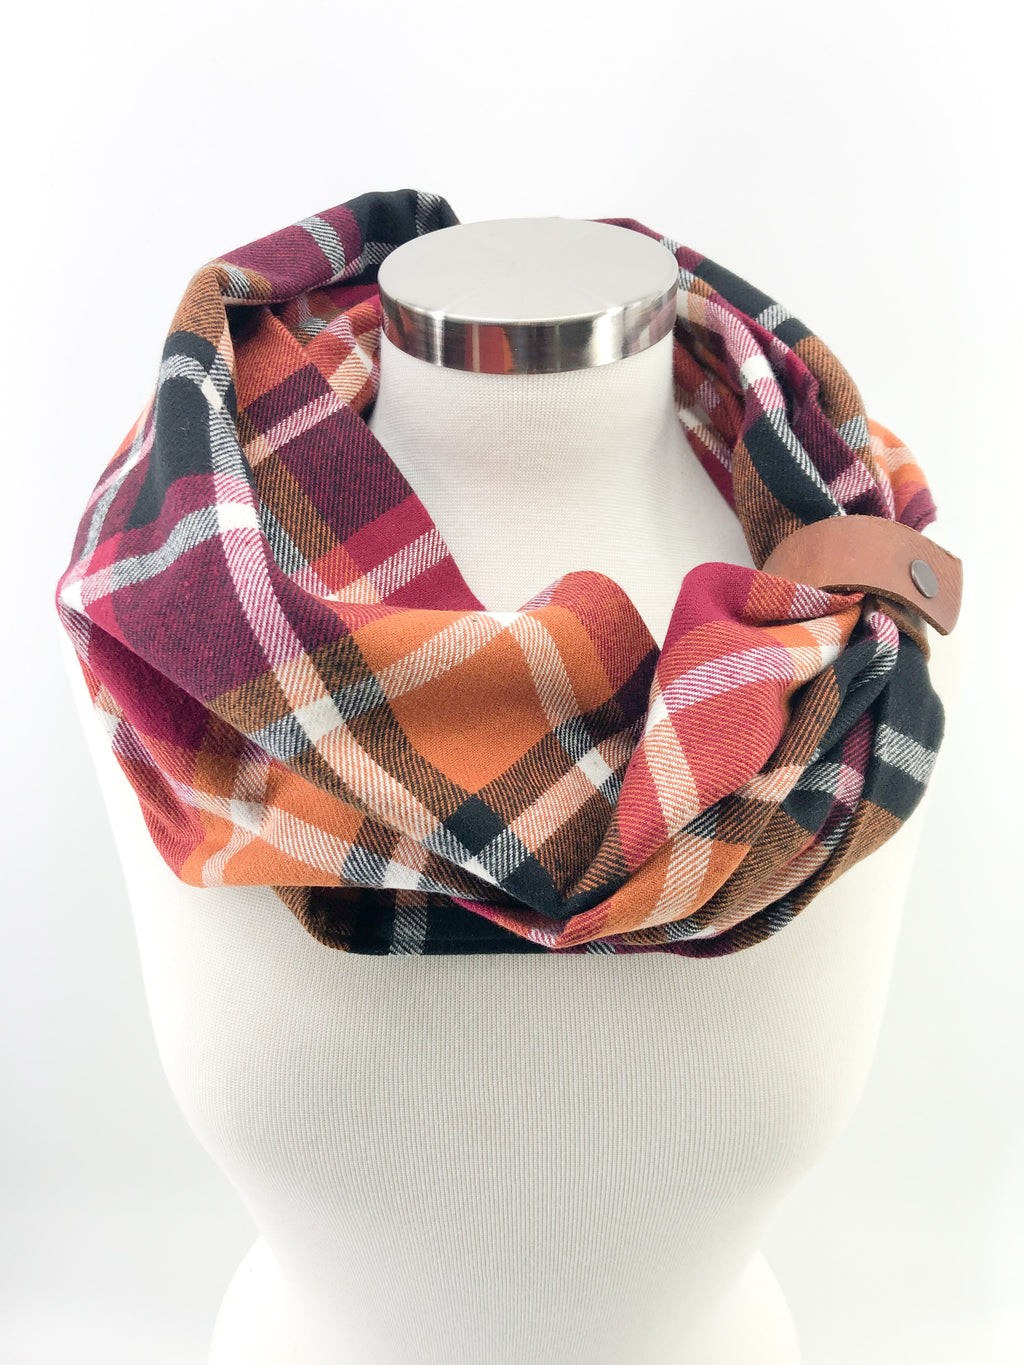 Harvest Plaid Eternity Scarf with a Leather Cuff